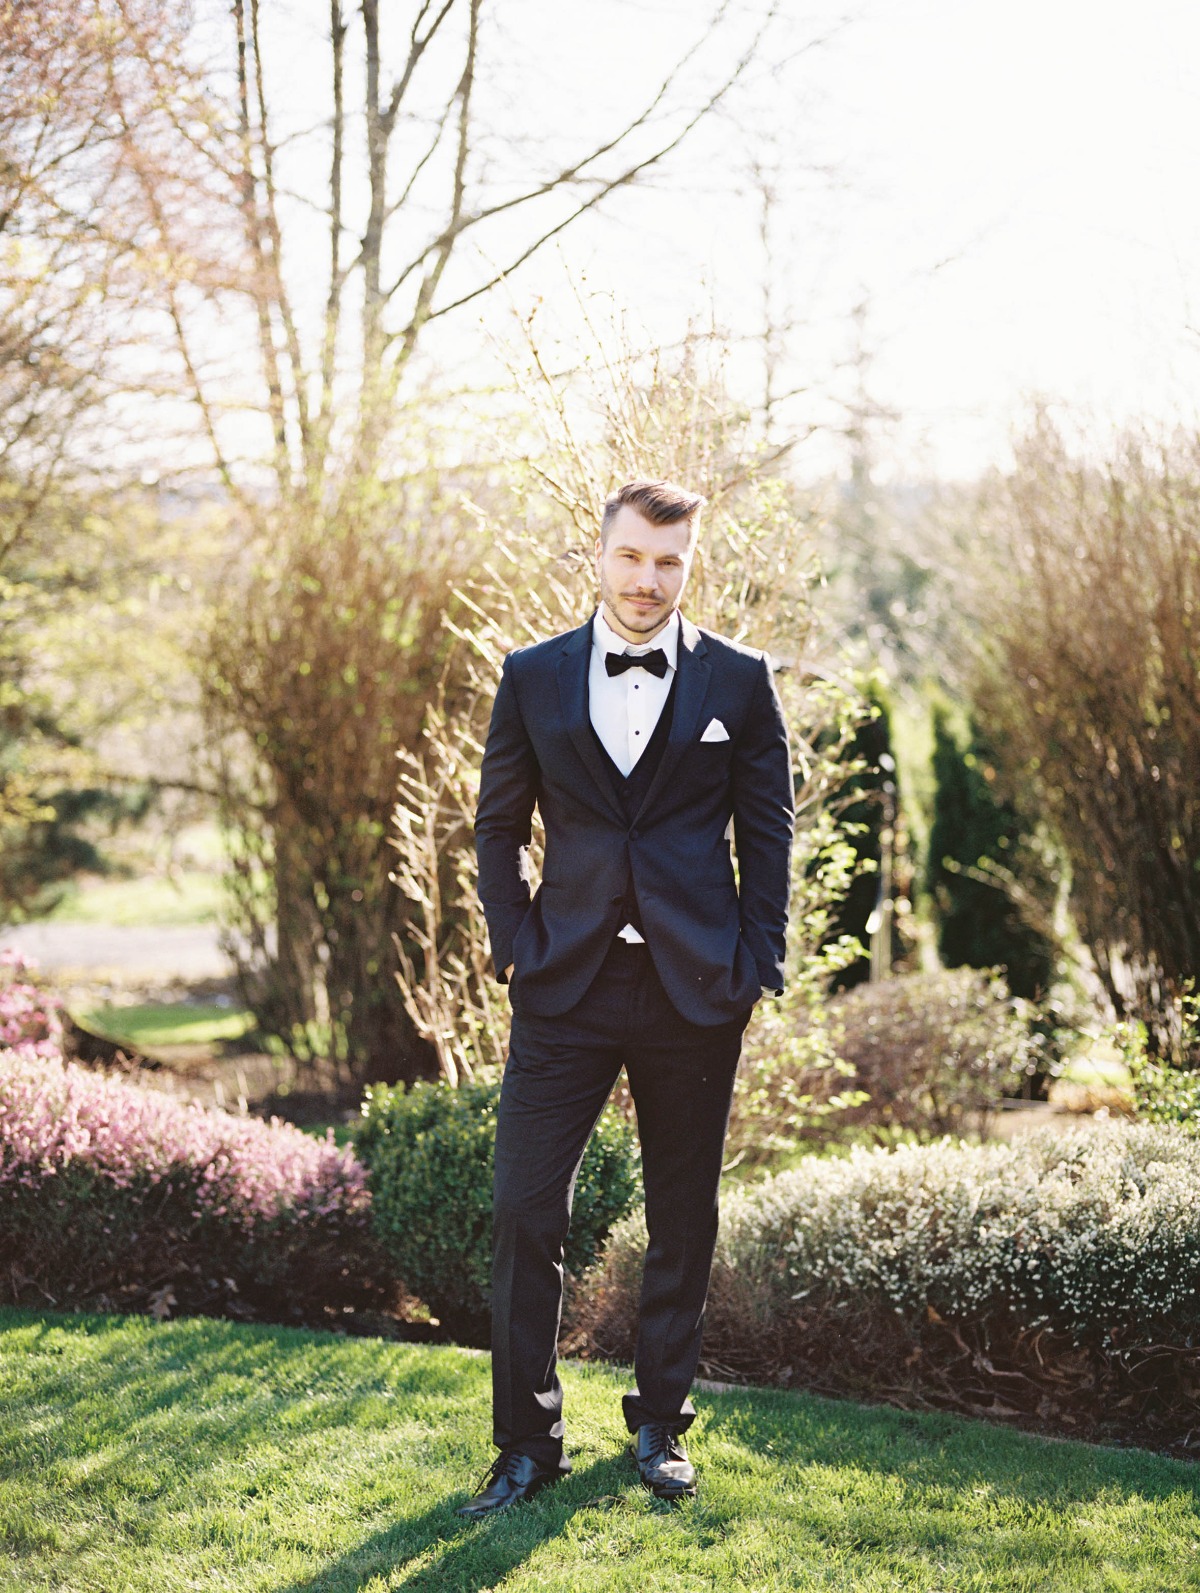 Groom in fitted tuxedo